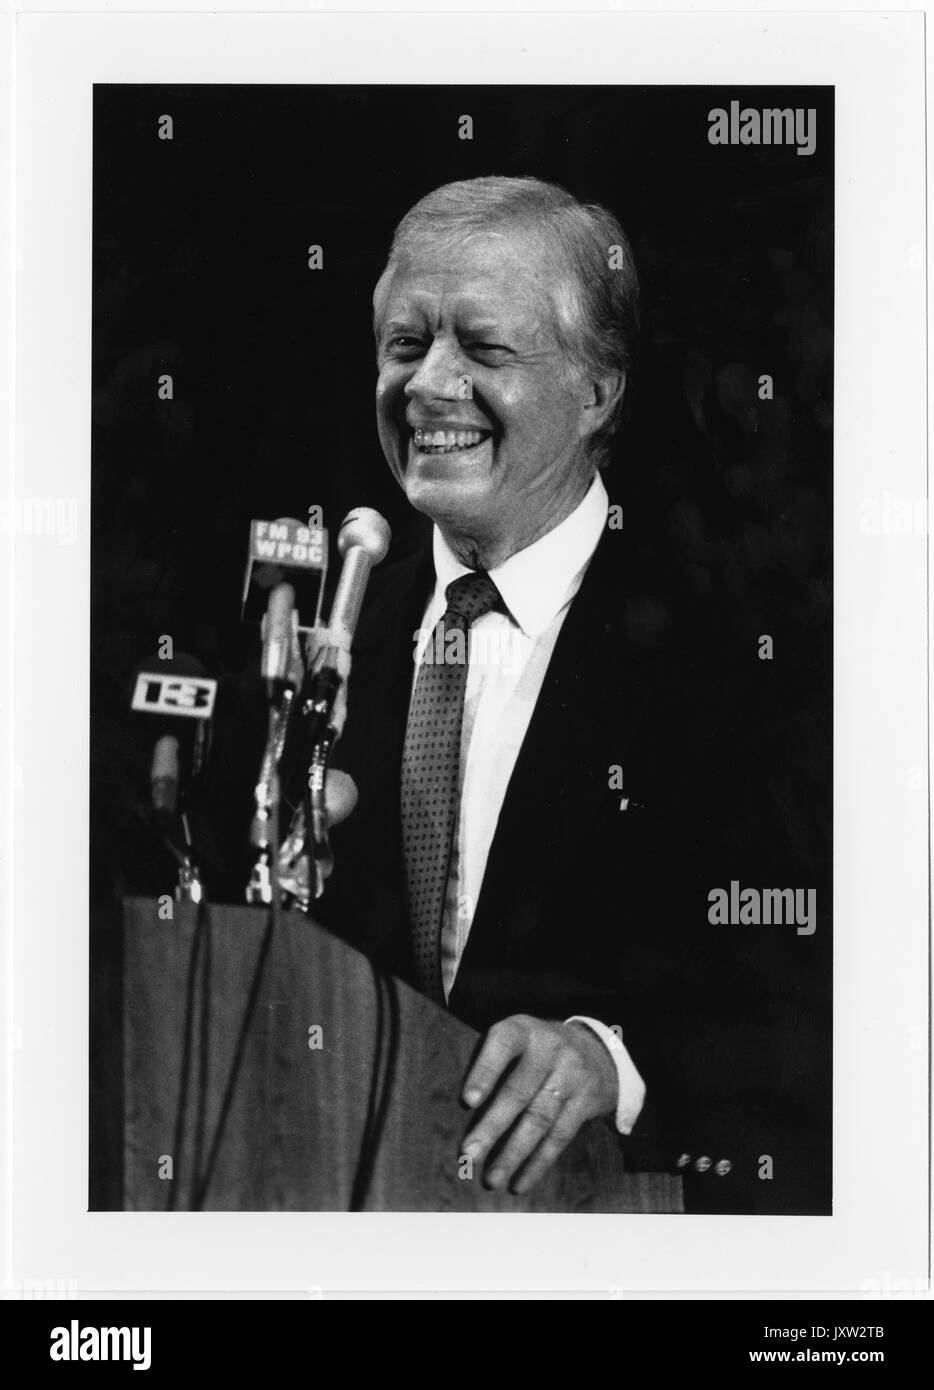 Albert Schweitzer Prize for Humanitarianism, James Earl Carter, Jr [Jimmy] Candid photograph, Carter at press conference after receiving award, 1987. Stock Photo